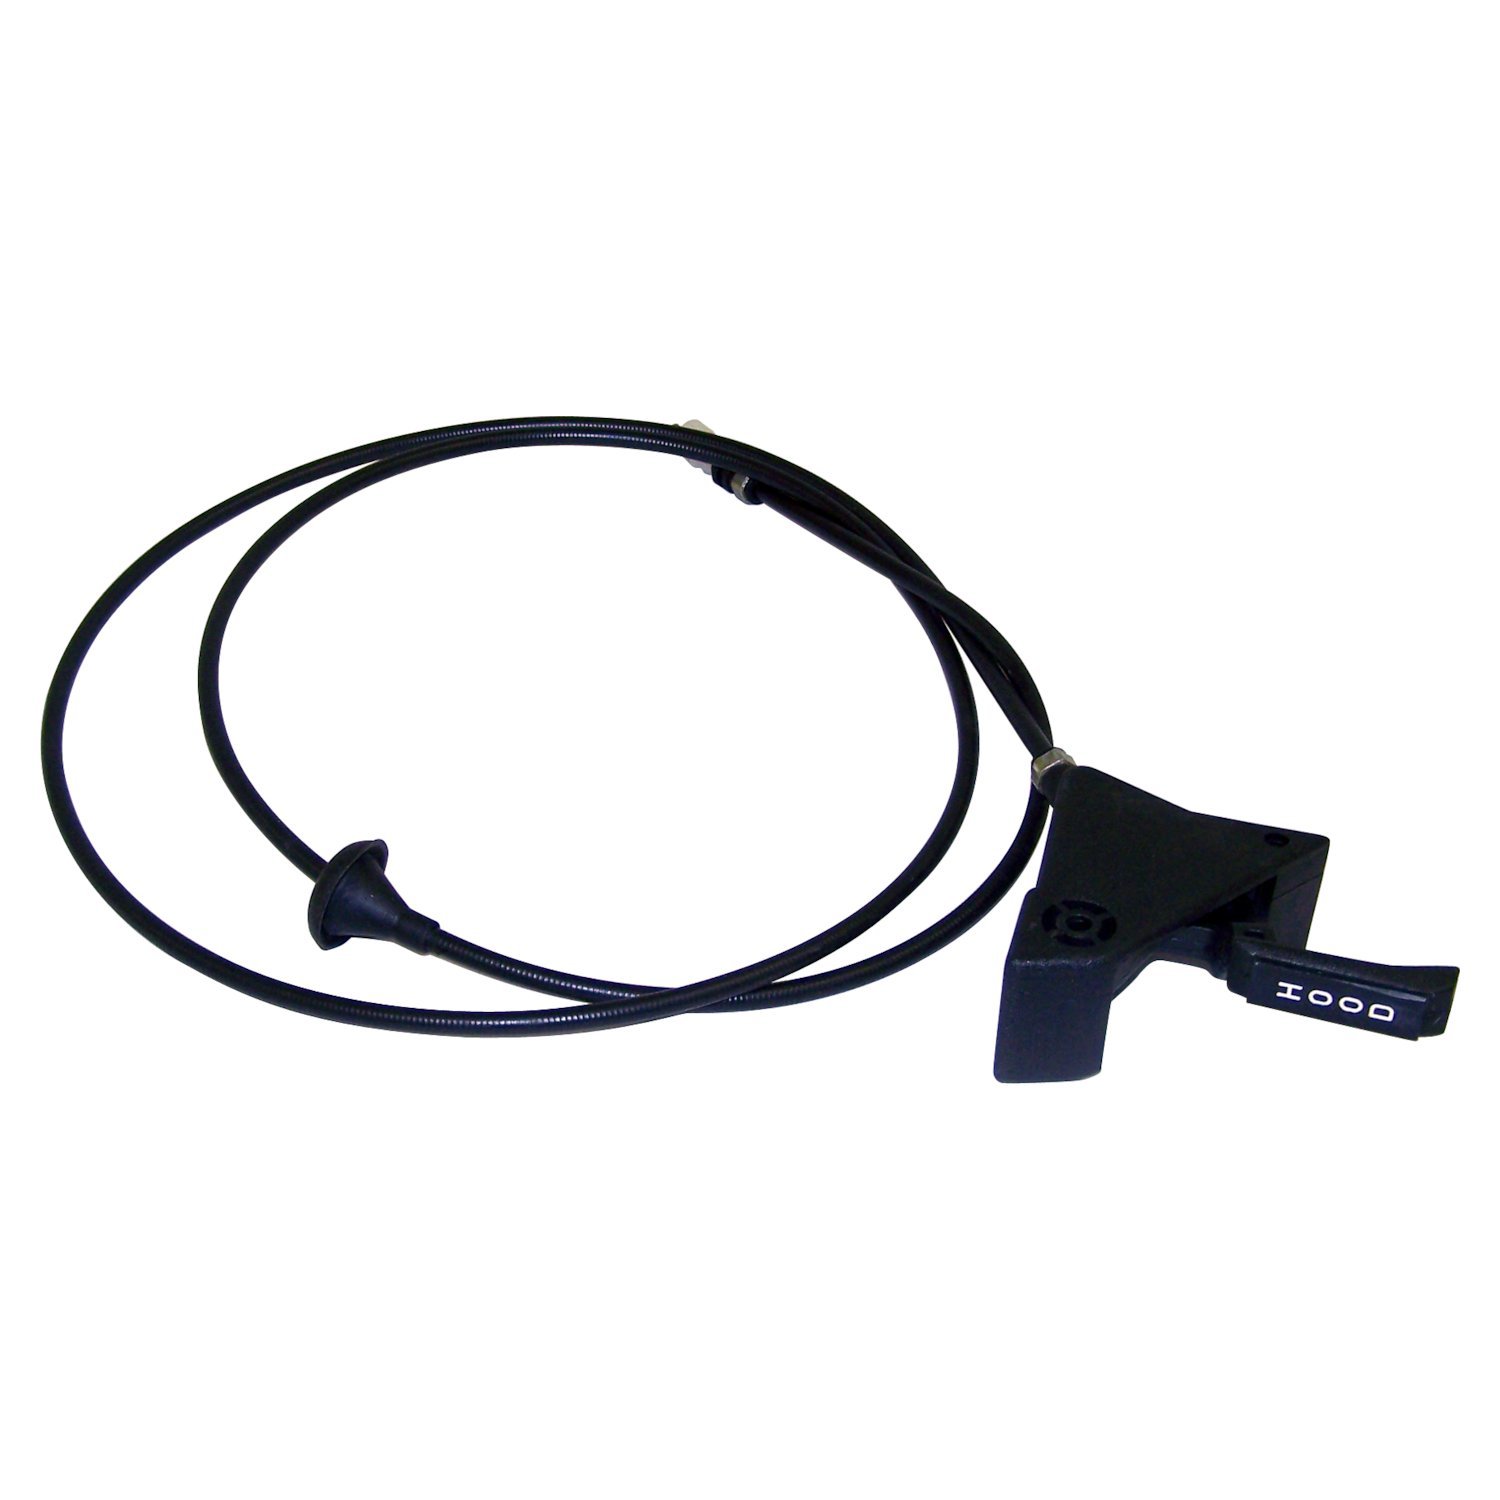 Hood Release Cable for 1981-1991 SJ, J-Series